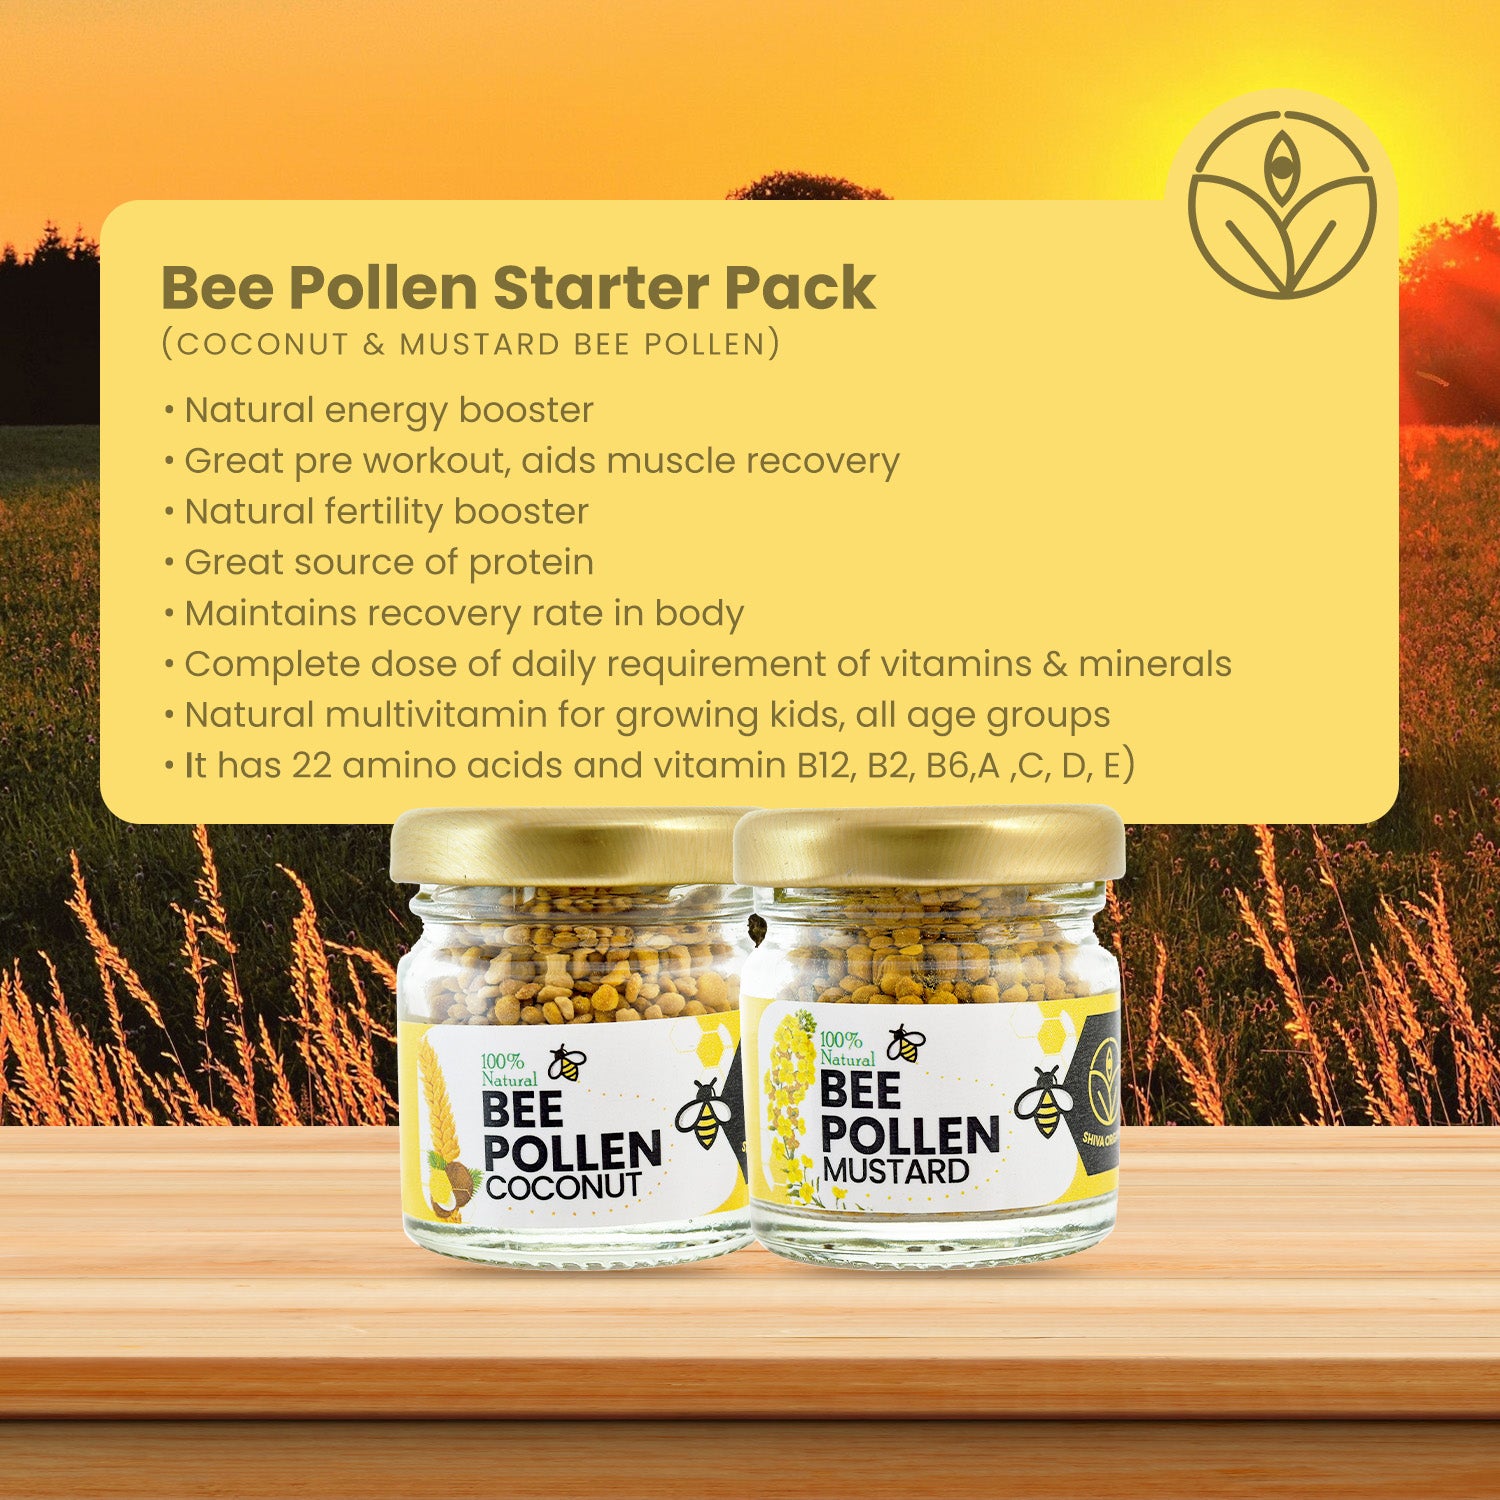 How to use bee pollen | buy natural superfood